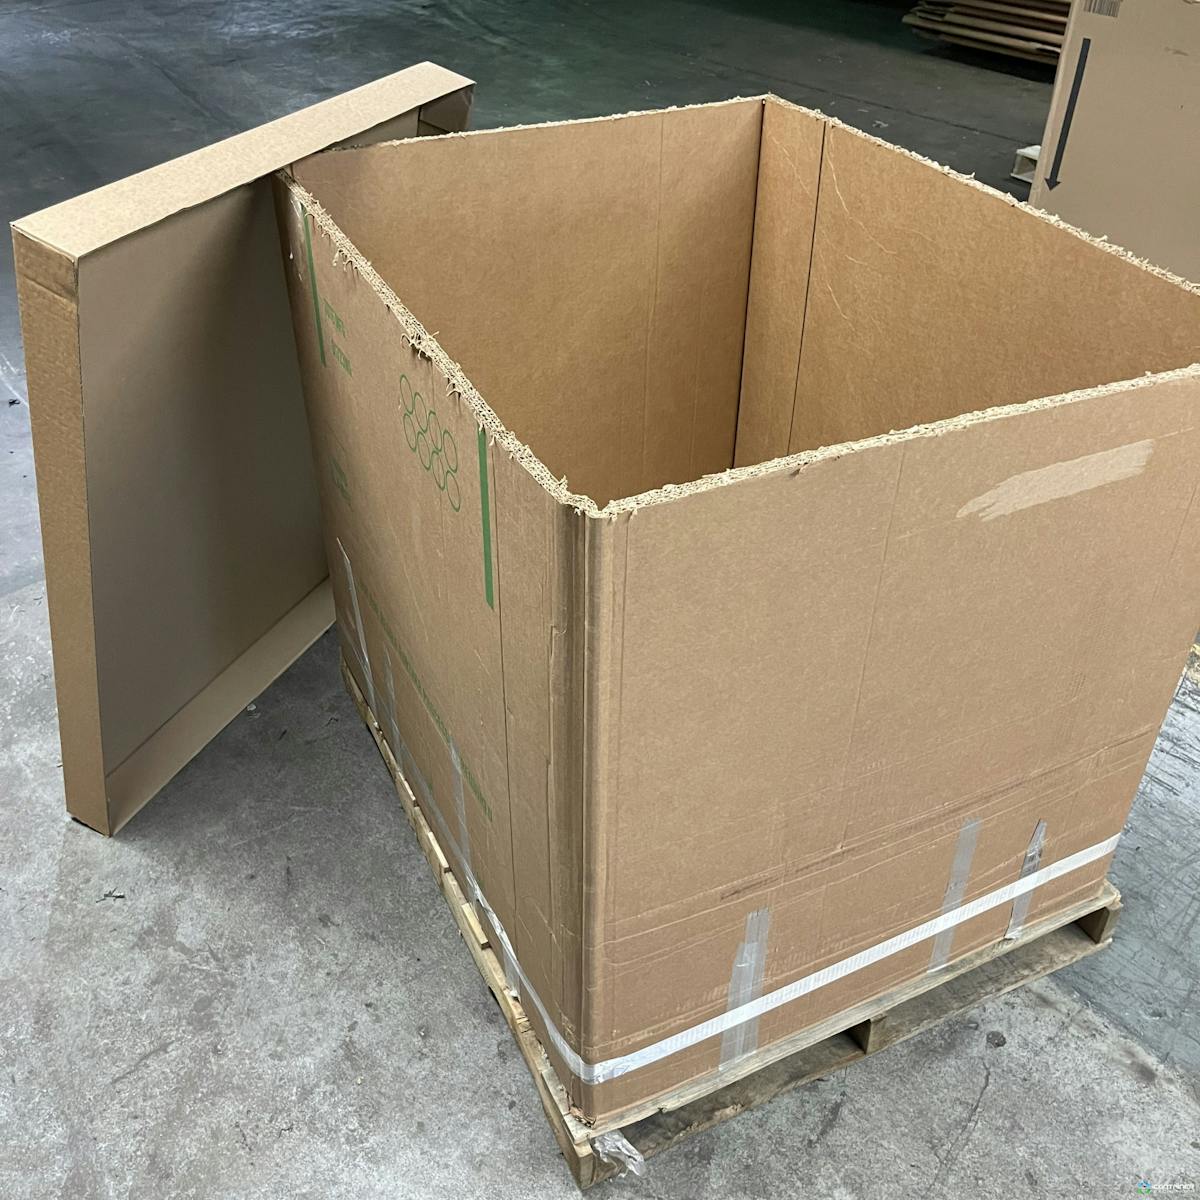 Gaylord Boxes For Sale: CLEARANCED - Used 48x40x41 HPT STYLE Four Wall Full Bottom Rectangular Gaylord Box With Cover - Illinois In Illinois - image  2